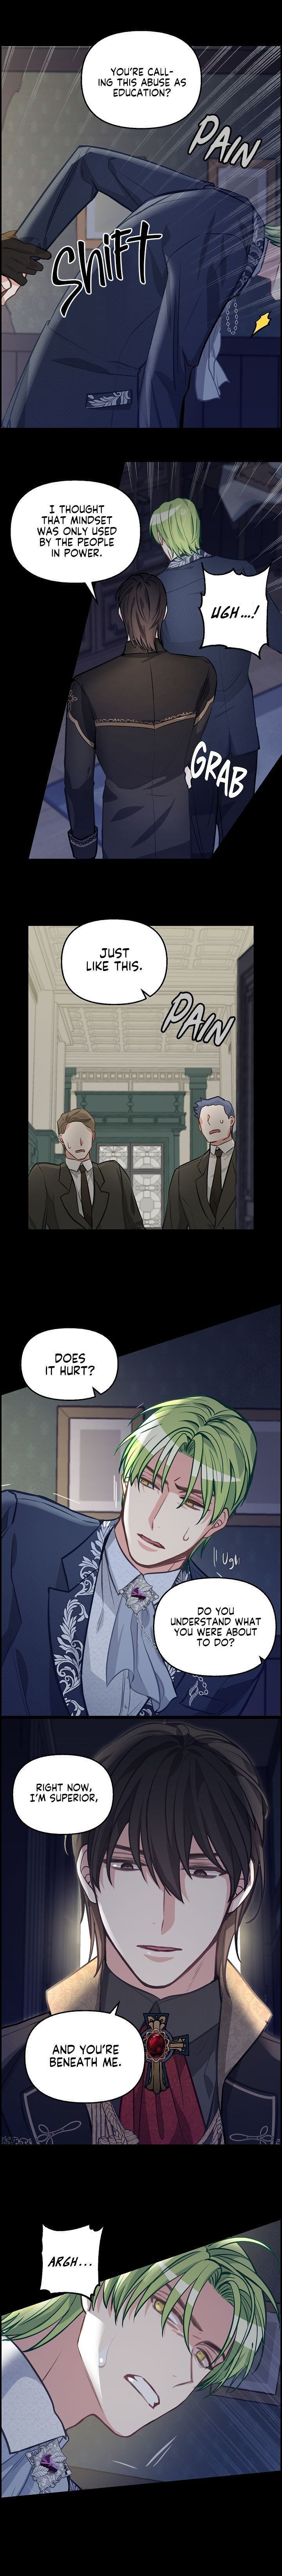 Please Throw Me Away Chapter 036 page 3